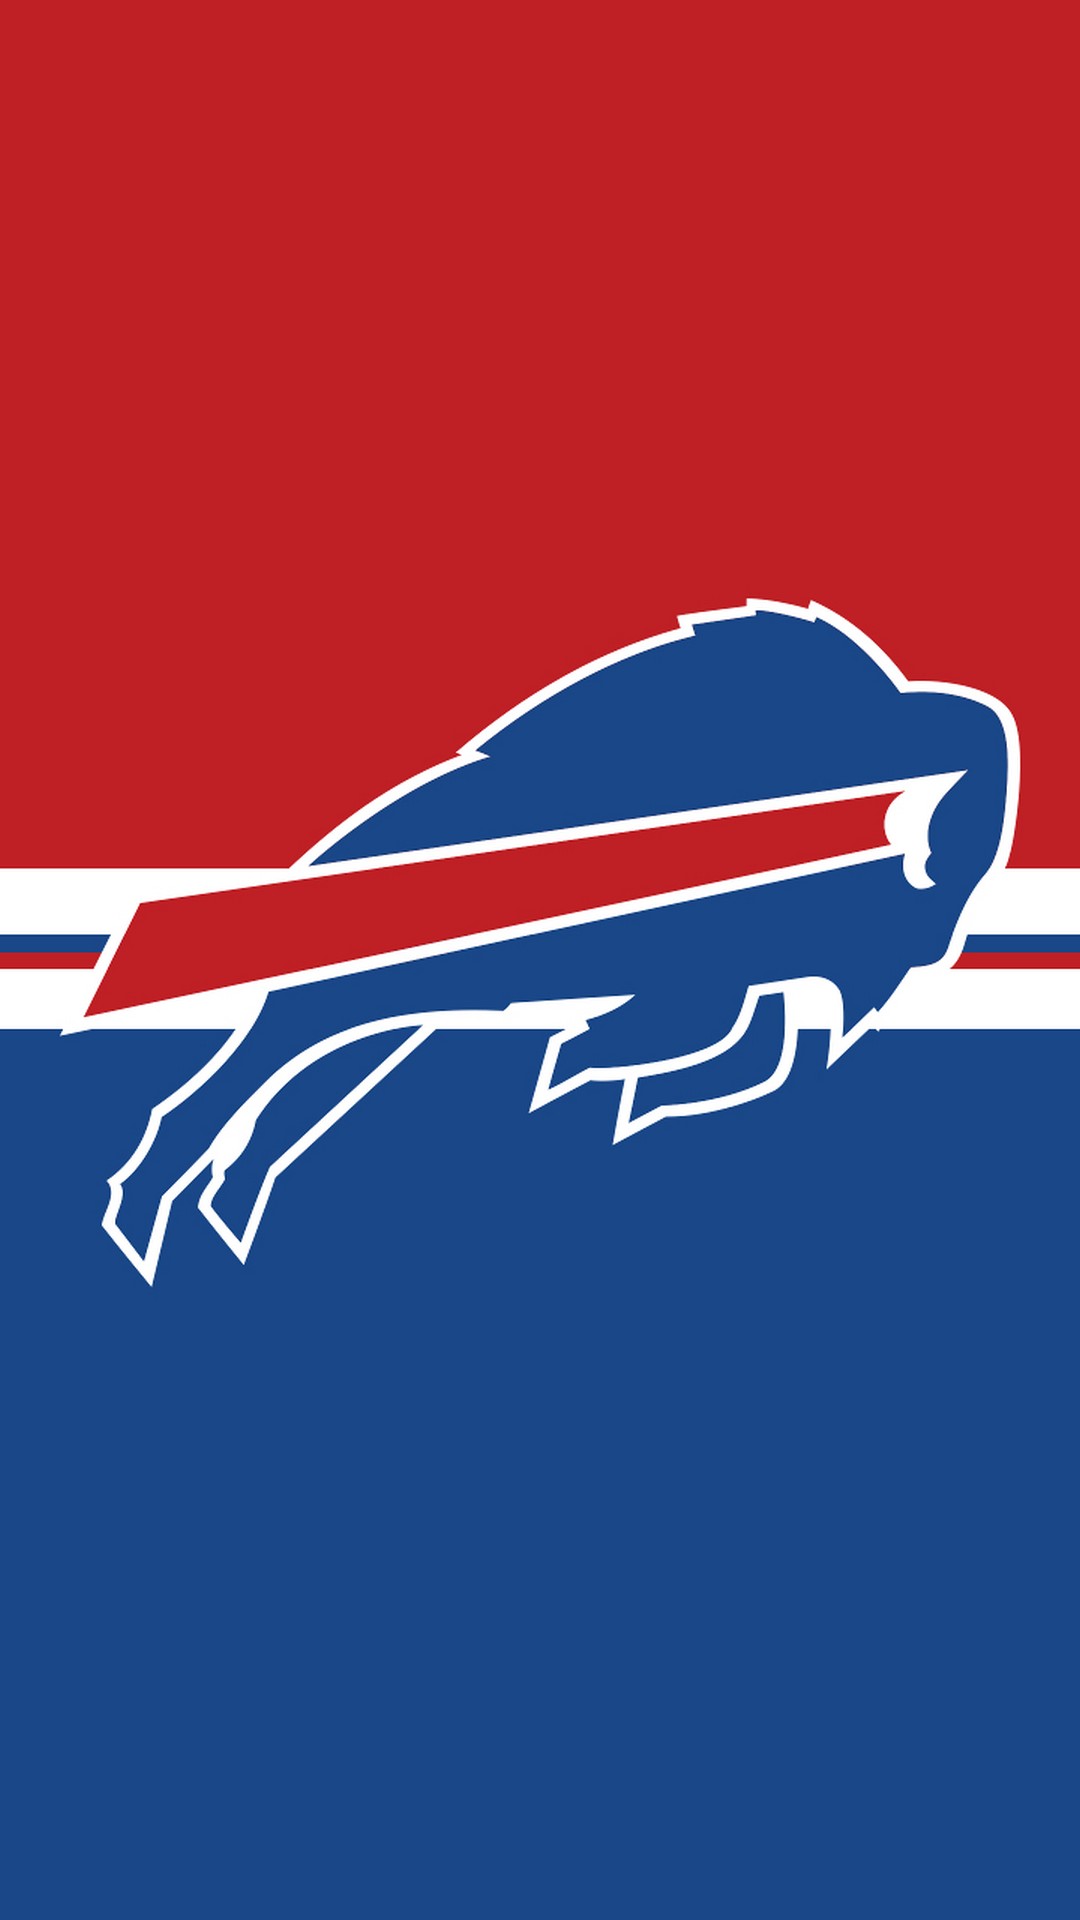 Buffalo Bills iPhone 7 Wallpaper with high-resolution 1080x1920 pixel. Download and set as wallpaper for Apple iPhone X, XS Max, XR, 8, 7, 6, SE, iPad, Android